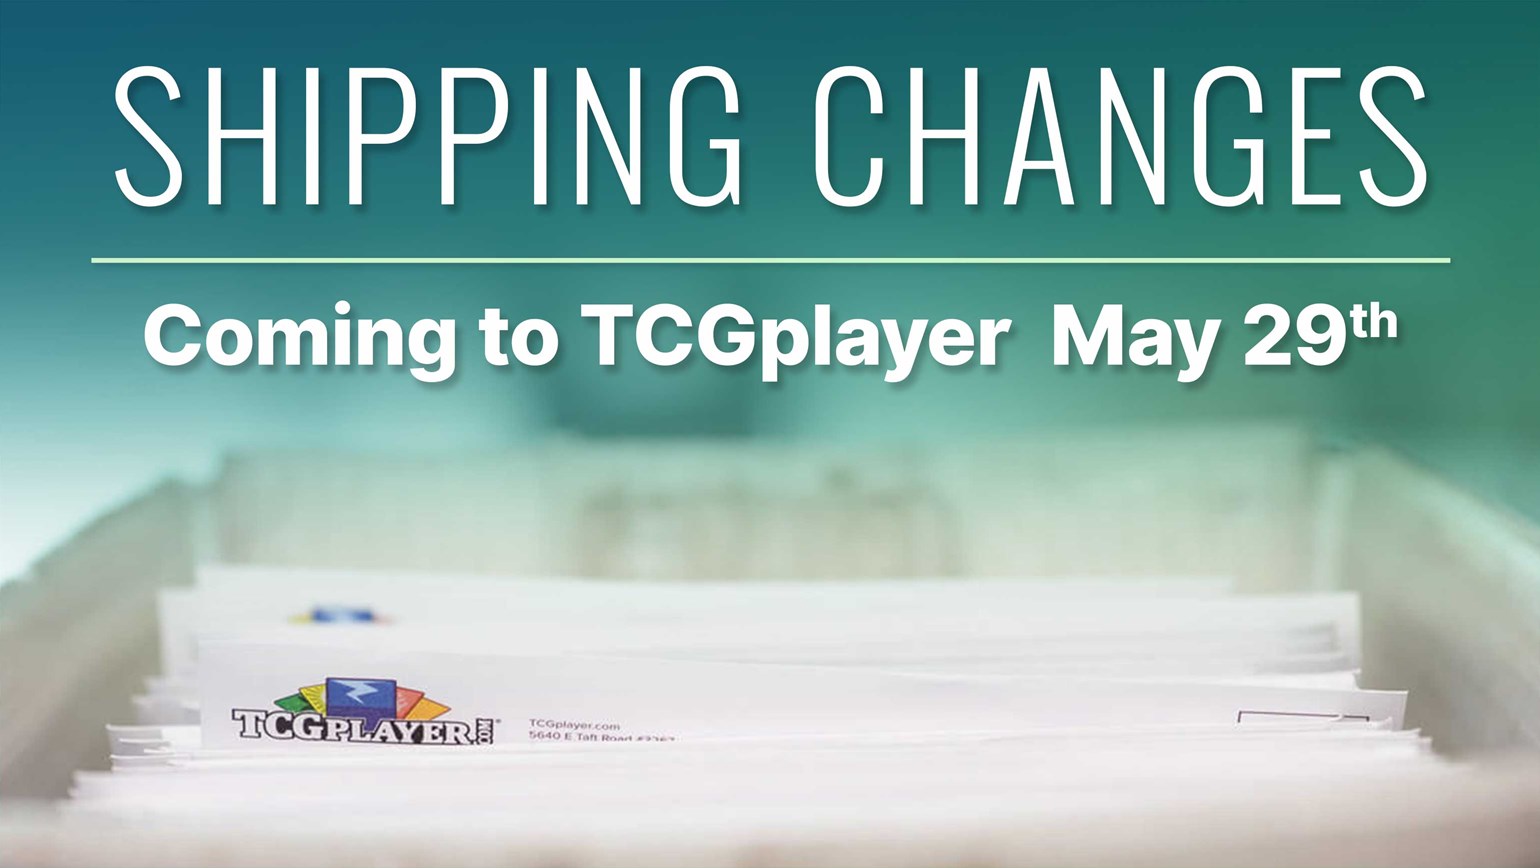 Shipping Changes Coming to TCGplayer May 29th